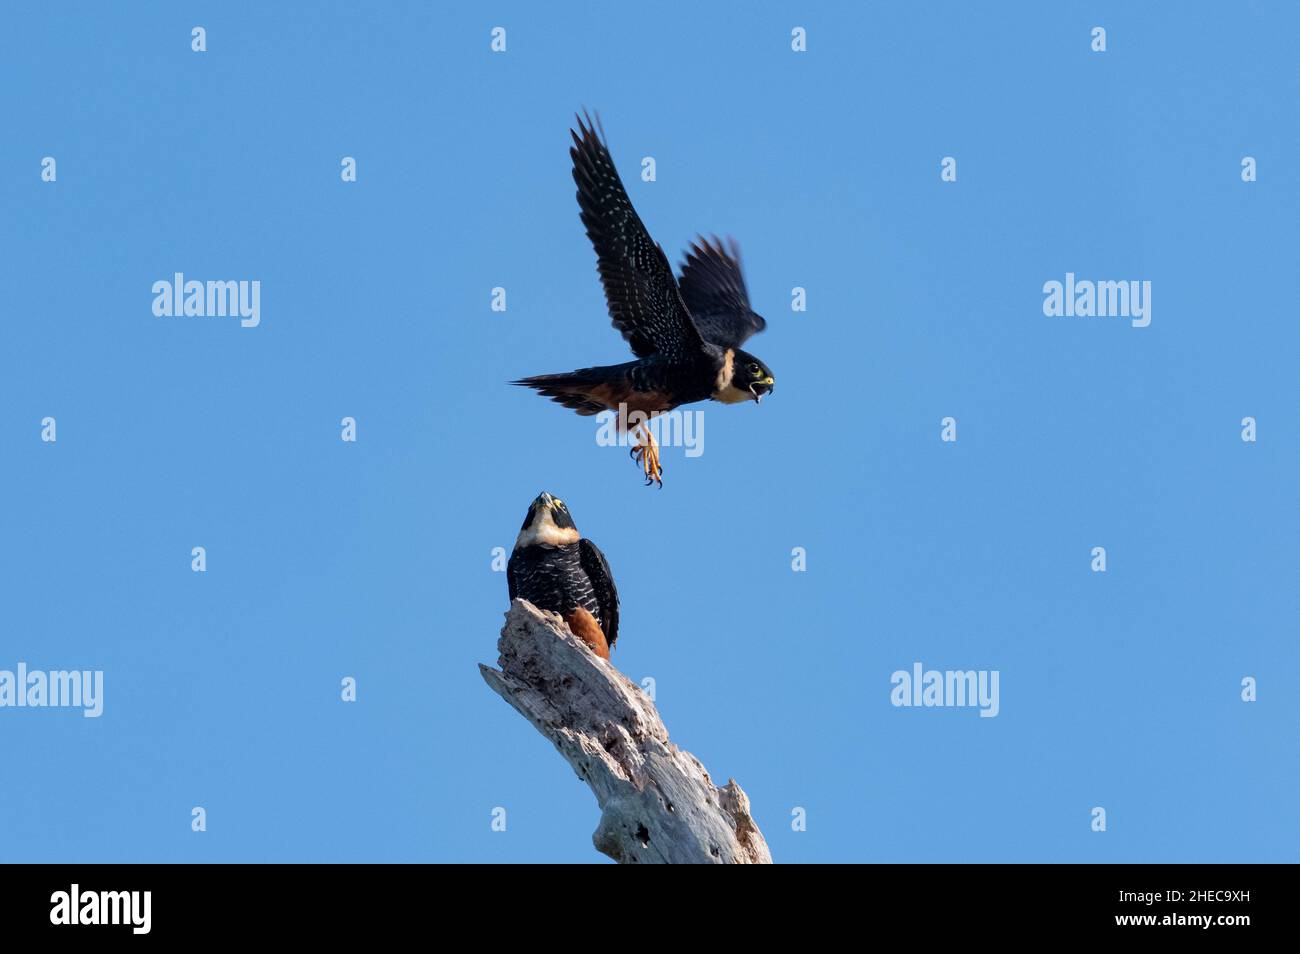 Two predator parent Bat Falcons, Falco rufigularis, one flying the other perching on a snag in the blue sky. Stock Photo